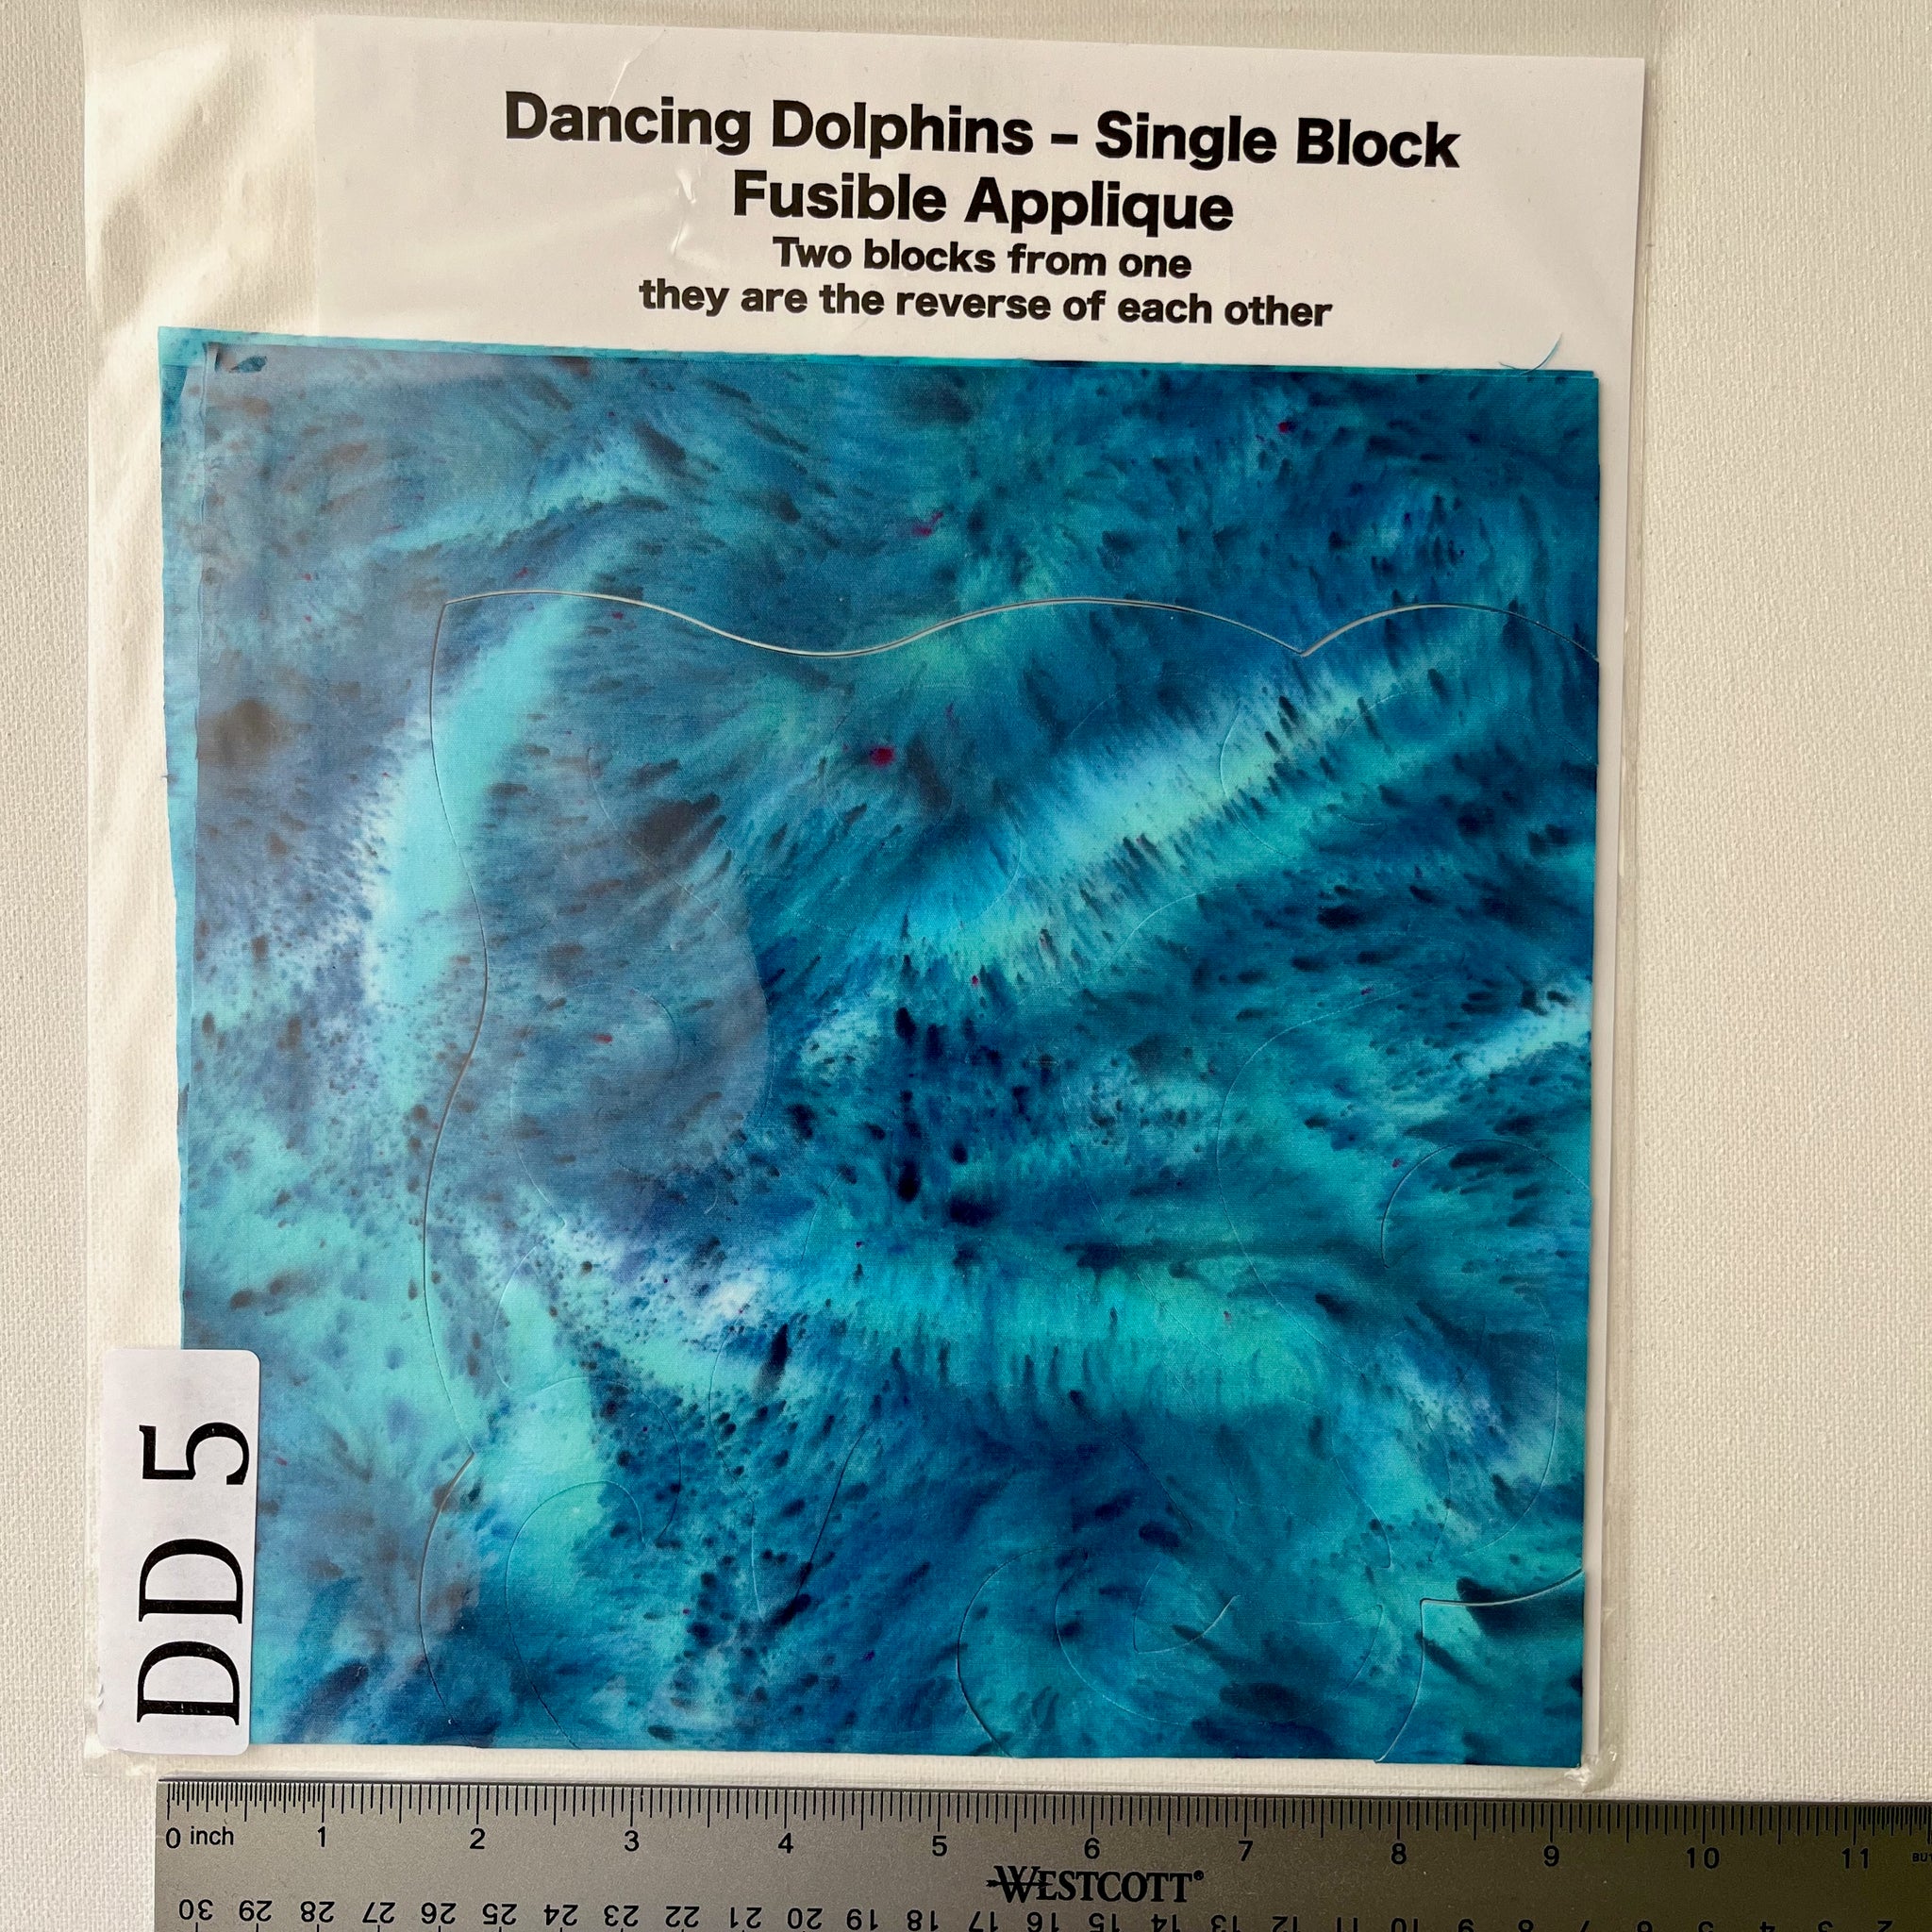 Dancing Dolphins Fusible Applique block made from Gabriele's hand dyed cotton-DD5